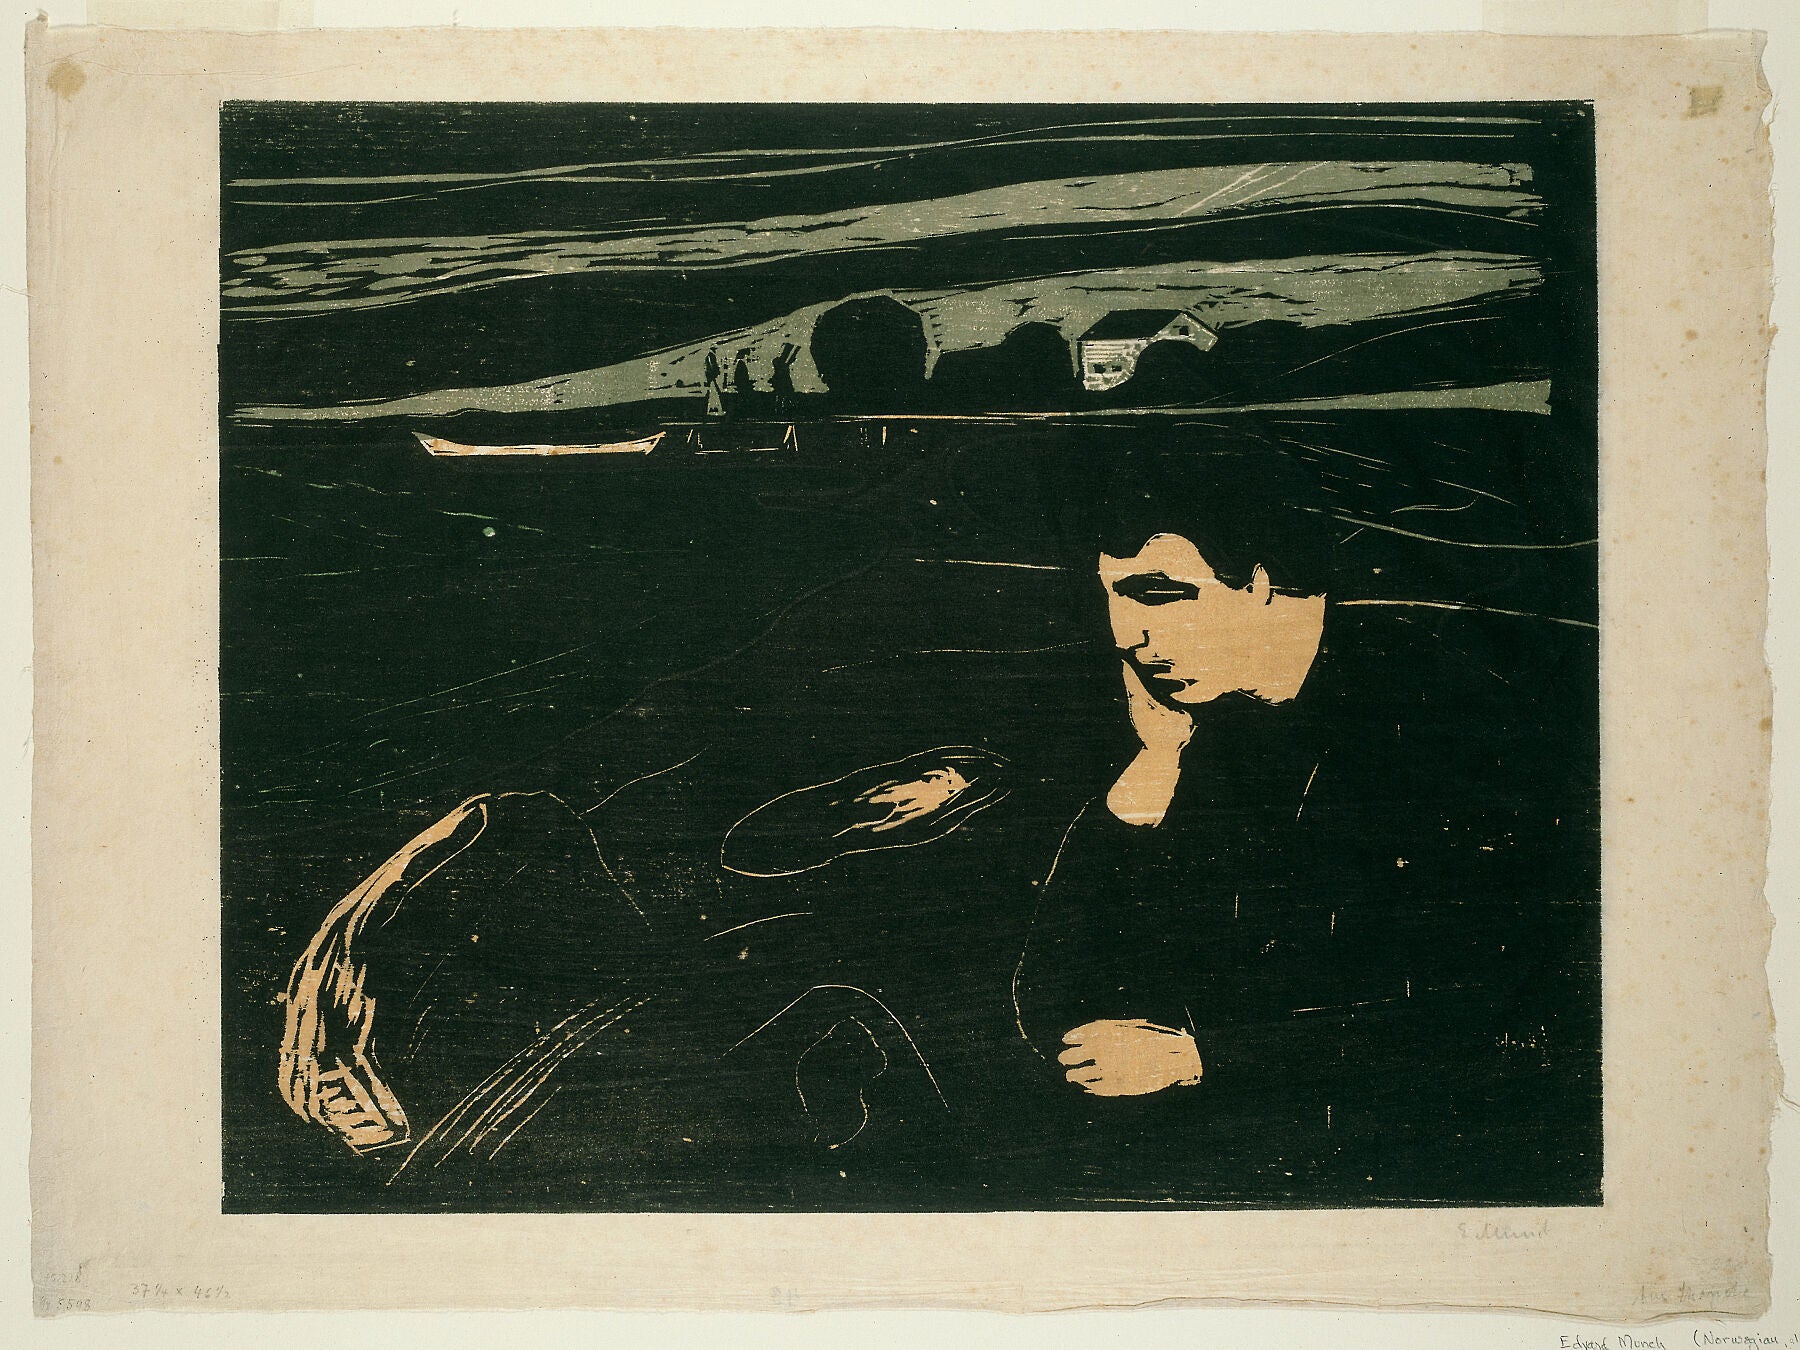 Melancholy III by Edvard Munch 1863-1944), 1902 - printed by Lassally (German, late 19th-early 20th century).